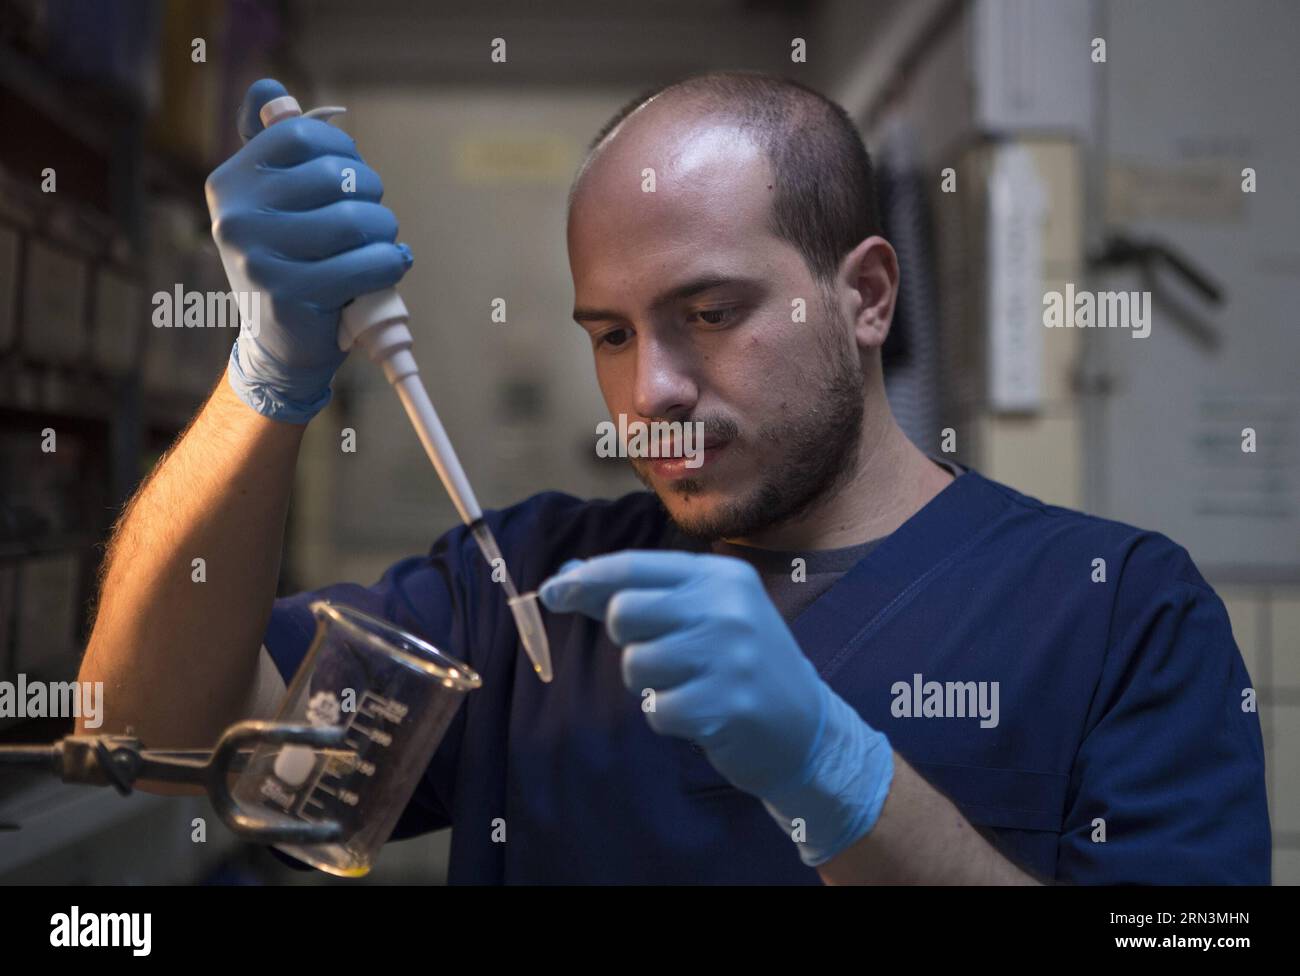 BUENOS AIRES, April 21, 2015 -- Emiliano Lertora, a biologist in the Poisonous Animals Area of the Antidotes Production Department of Malbran Institute, drops the venom from a Yarara snake into a container in Buenos Aires, Argentina, on April 21, 2015. The Department is in charge of producing antidotes with the poison extracted from snakes, spiders and scorpions. Martin Zabala)(zhf) ARGENTINA-BUENOS AIRES-SCIENCE-ANTIDOTES e MARTINxZABALA PUBLICATIONxNOTxINxCHN   Buenos Aires April 21 2015 Emiliano  a biologist in The poisonous Animals Area of The antidotes Production Department of MALBRAN Ins Stock Photo